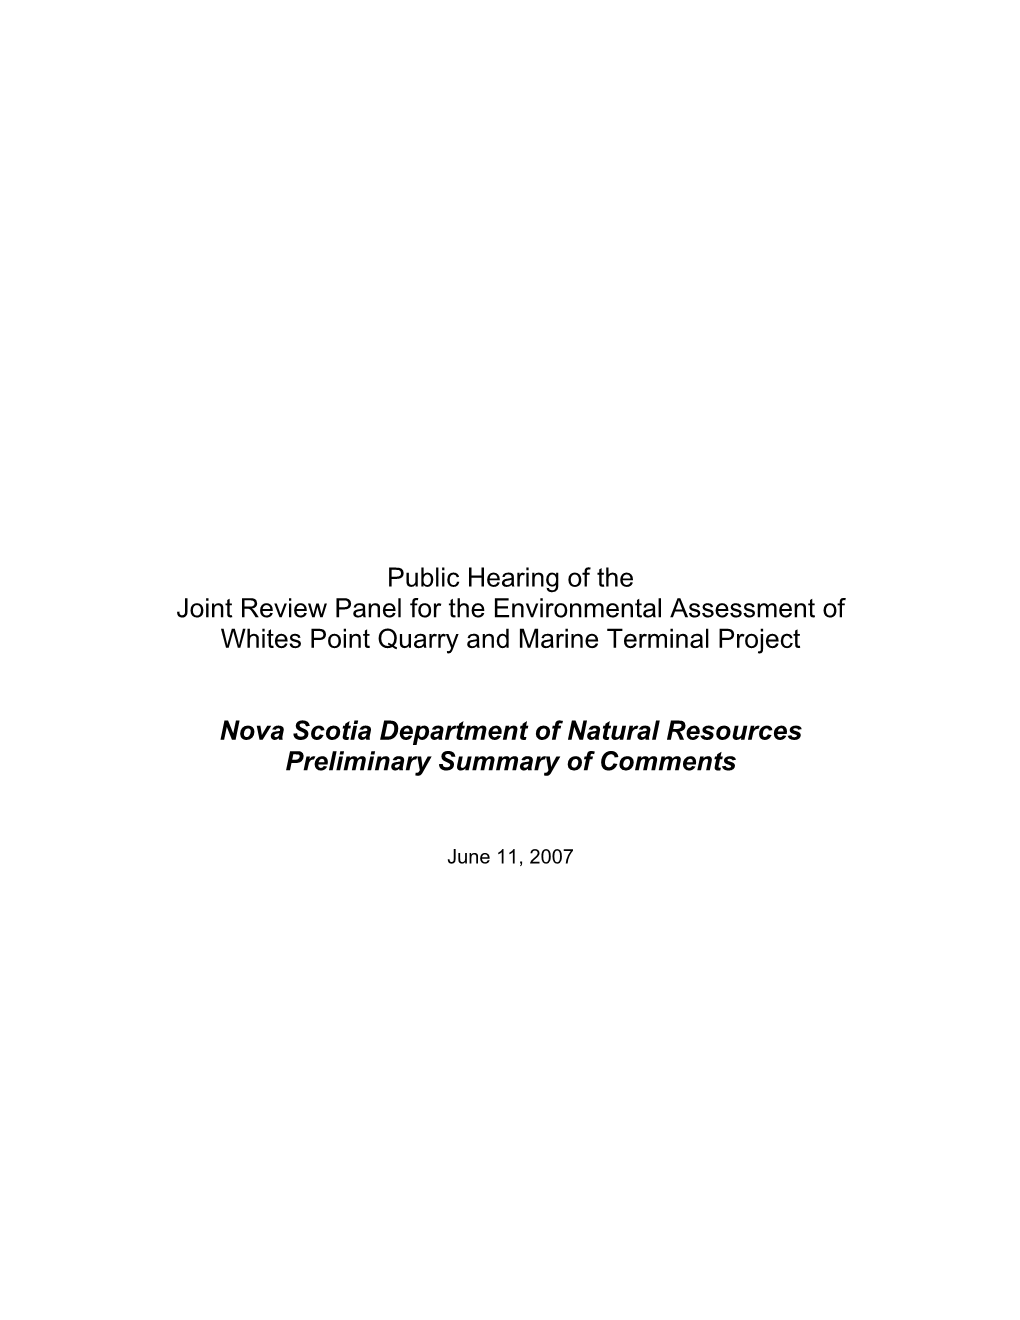 Public Hearing of the Joint Review Panel for the Environmental Assessment of Whites Point Quarry and Marine Terminal Project